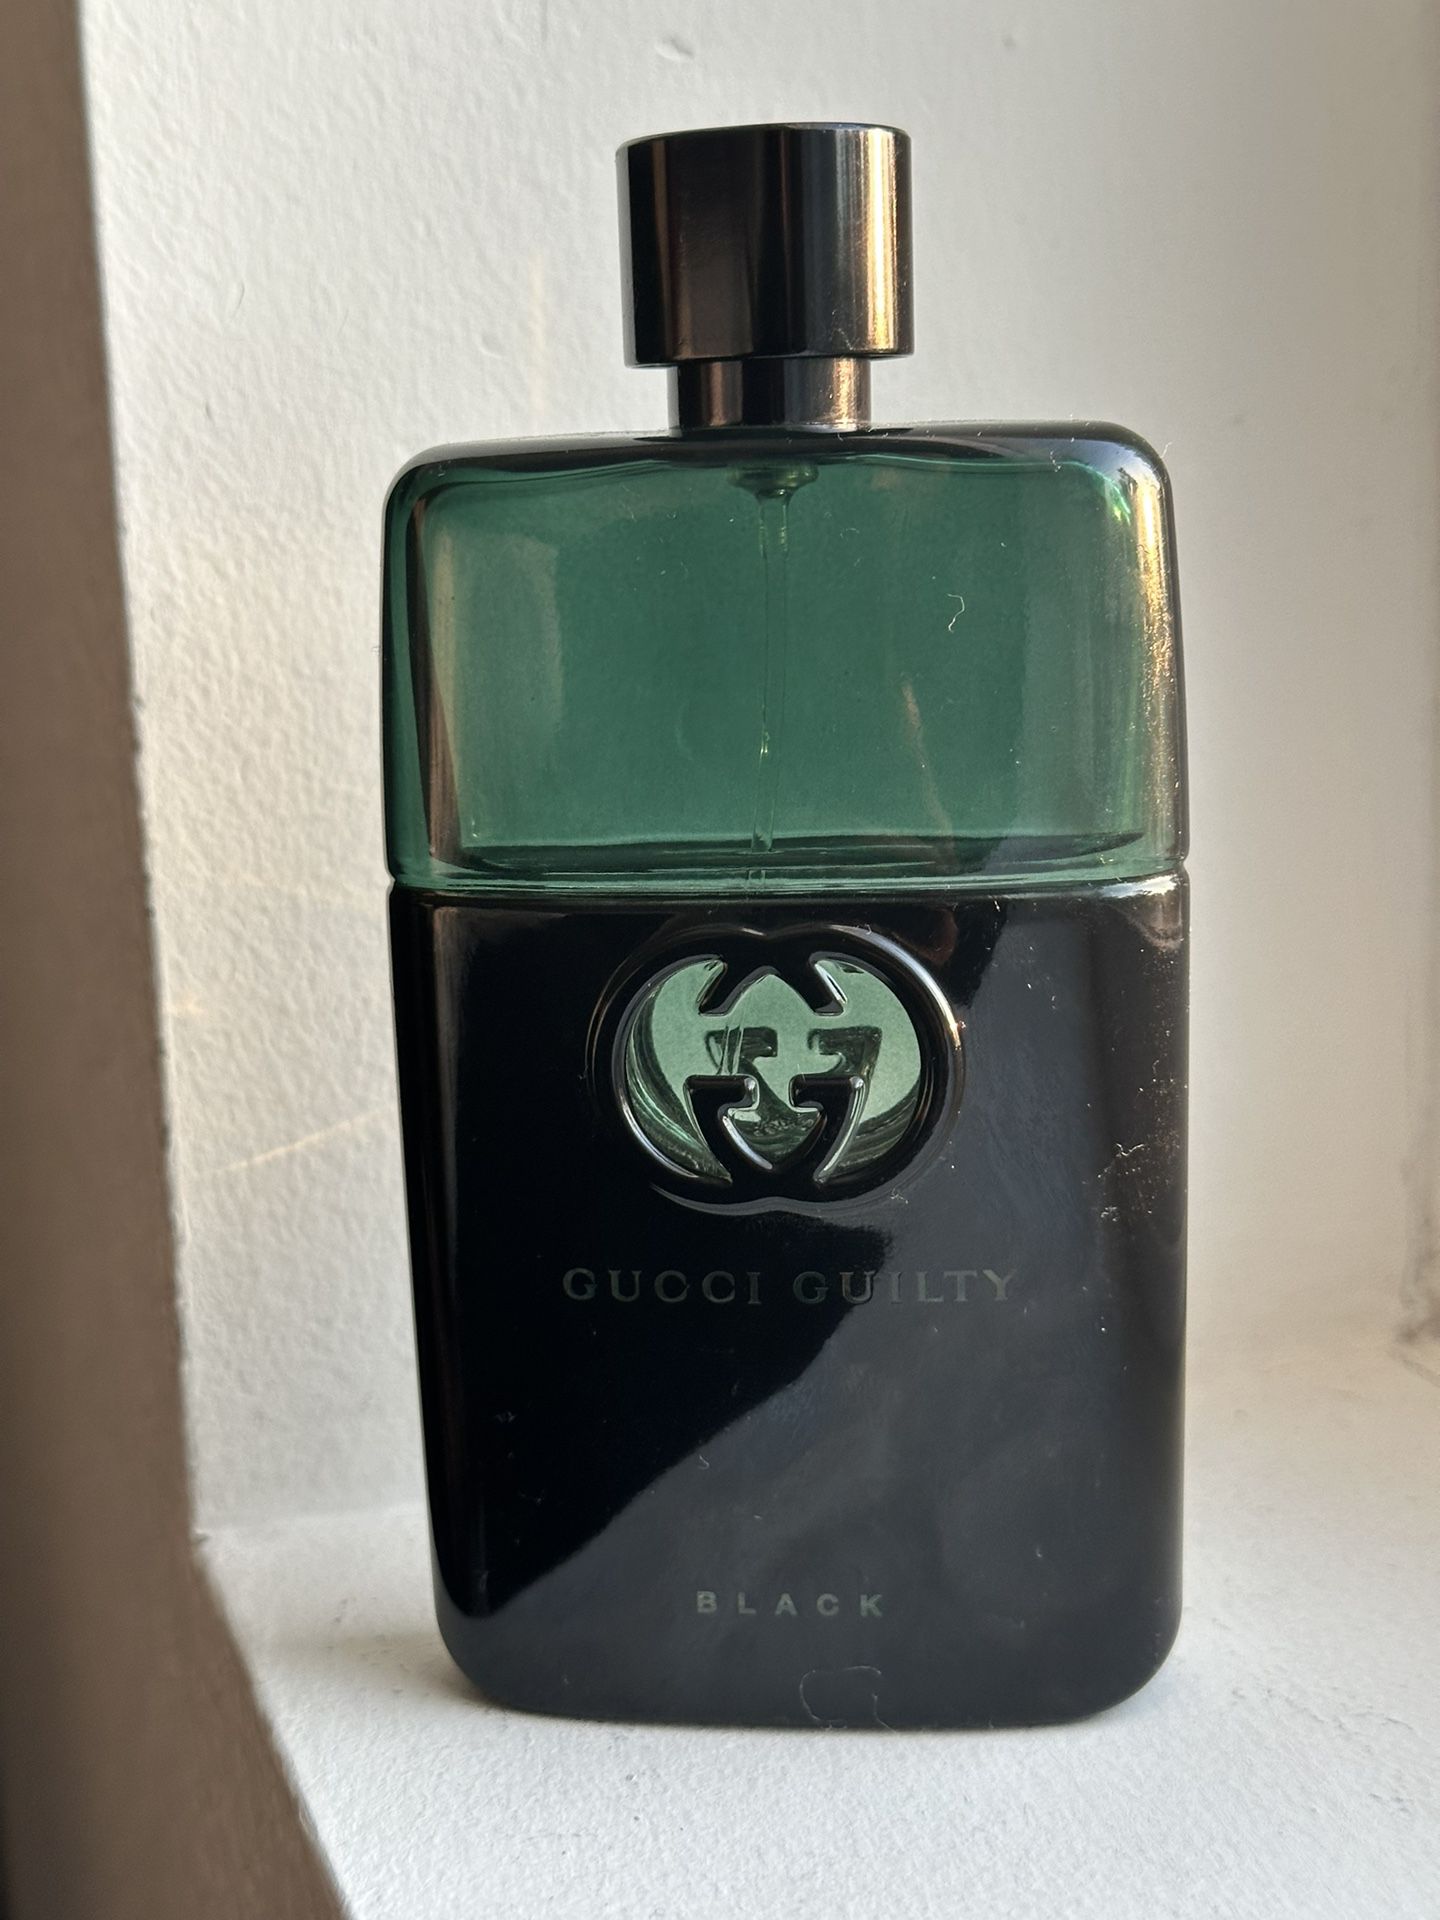 Gucci Guilty Black EDT 3 Oz (about 60% Full)